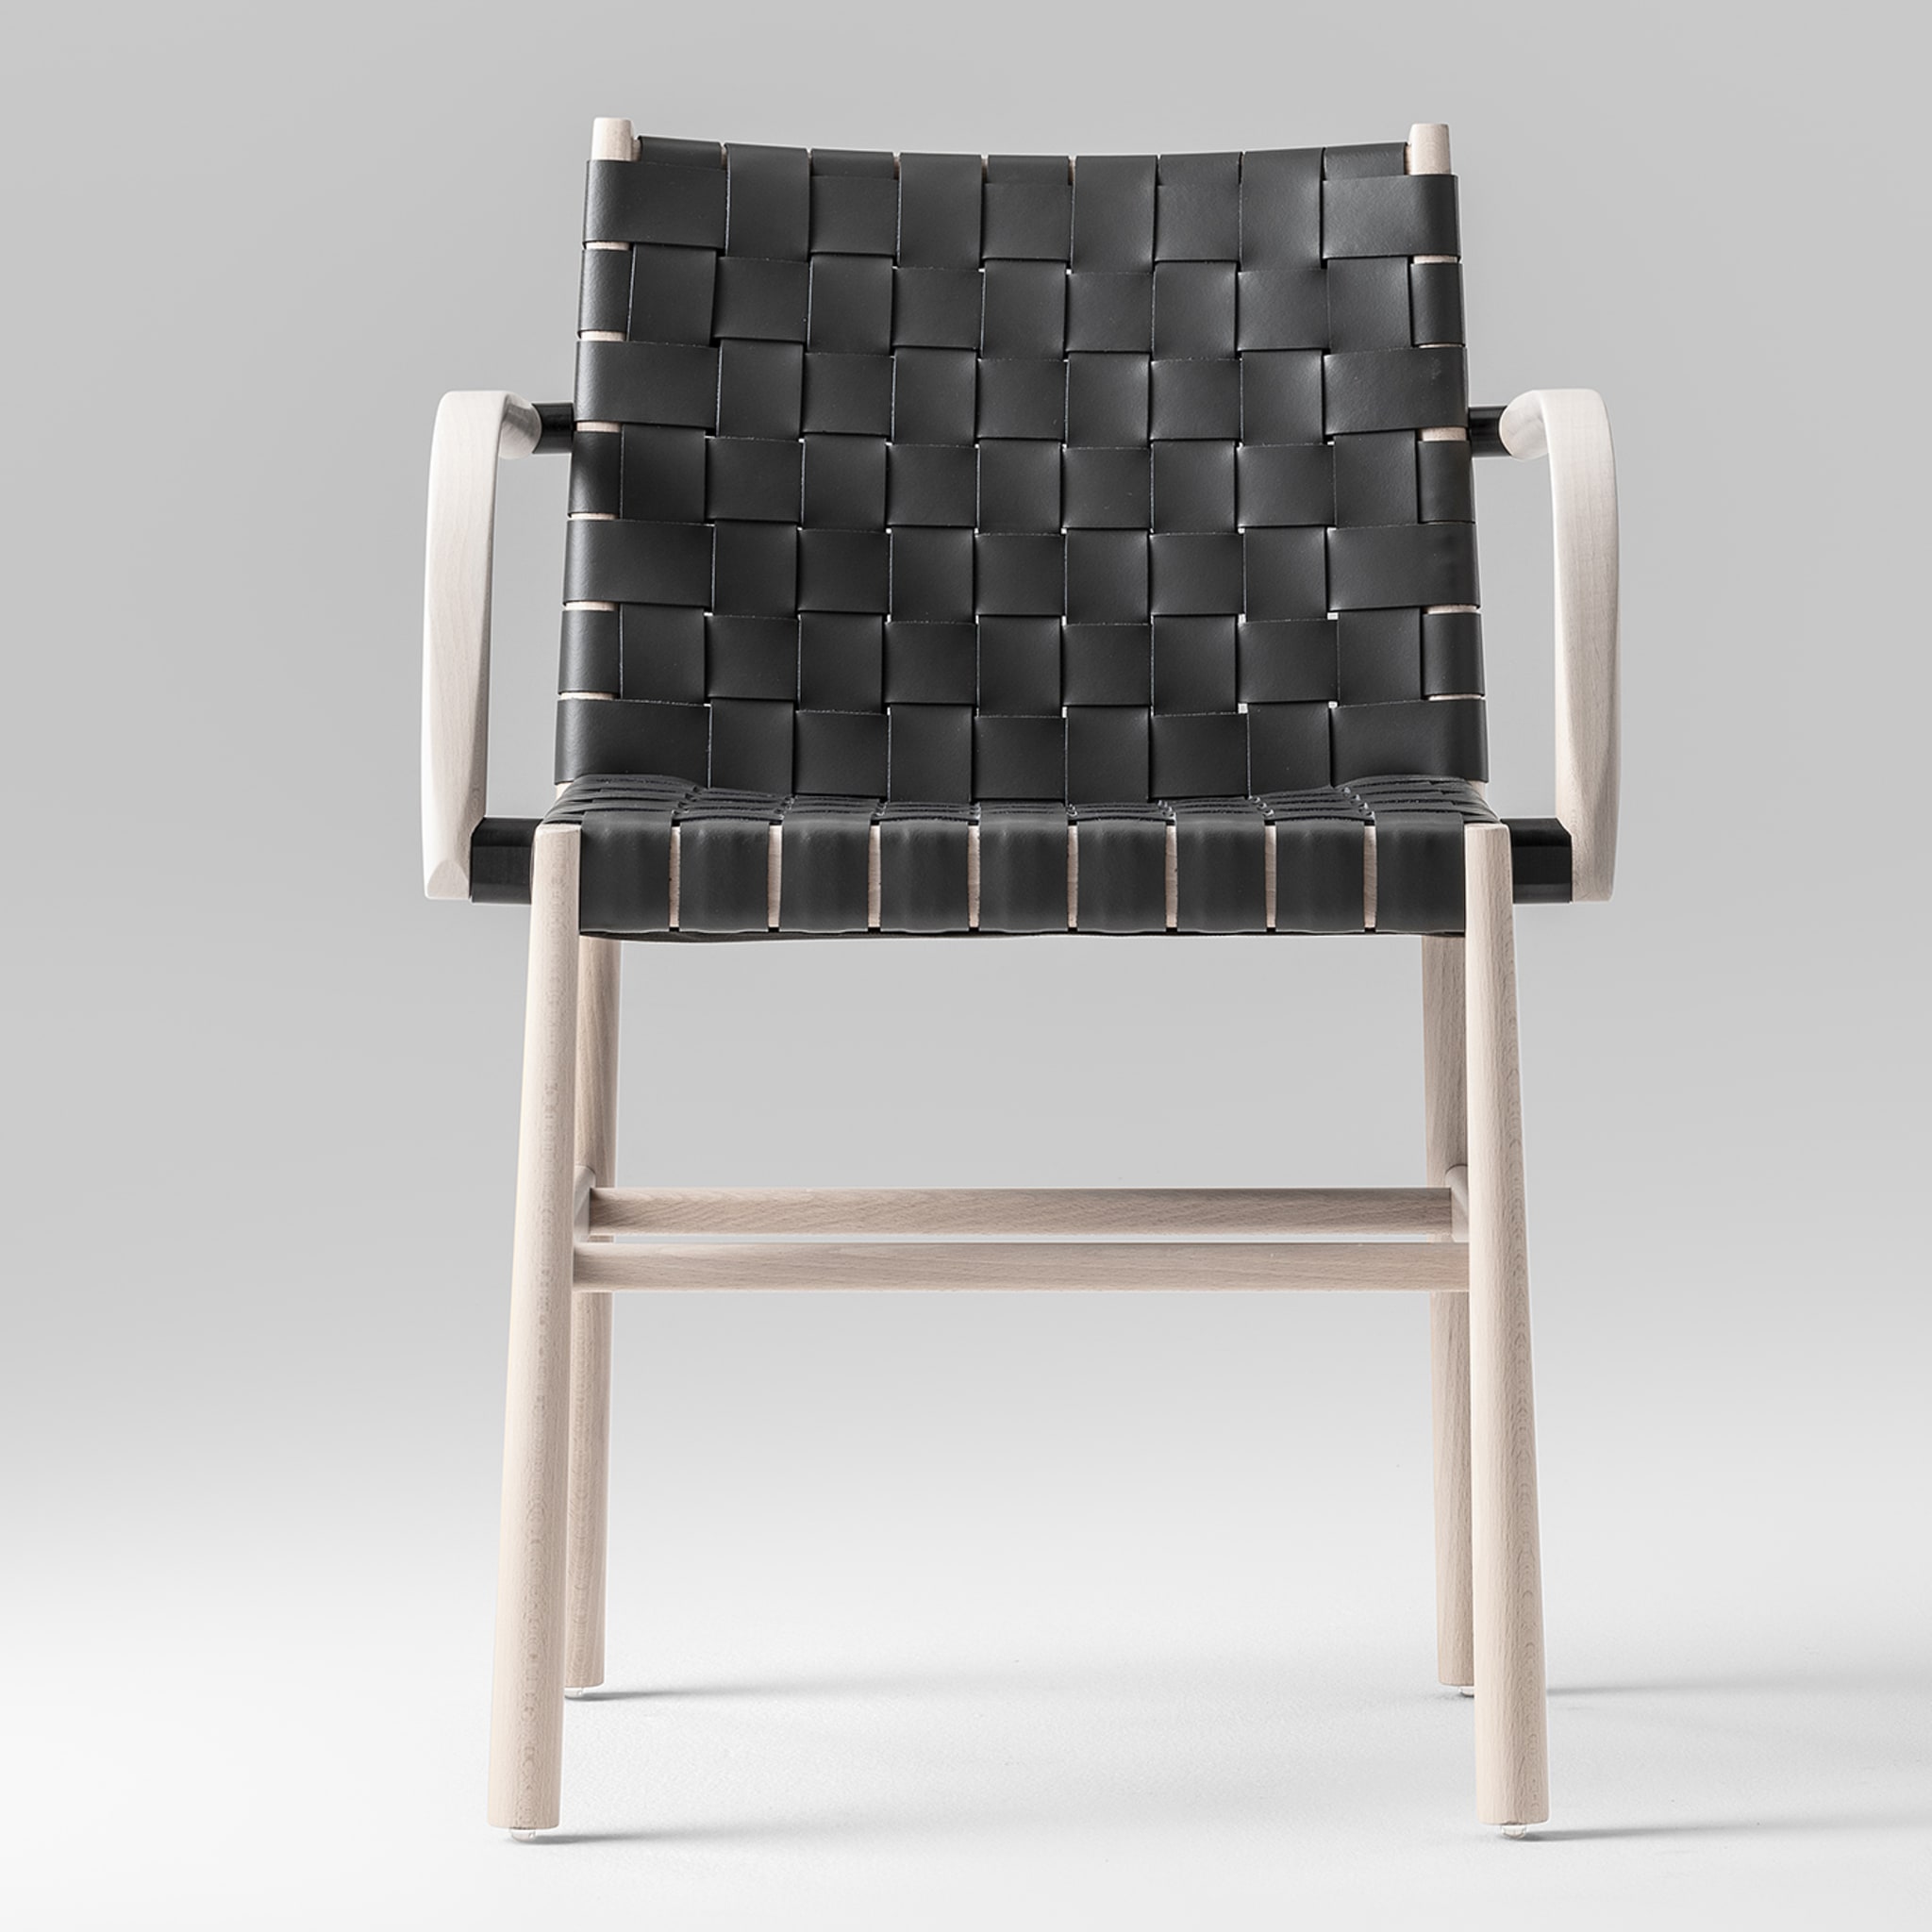 Julie White and Black chair with armrests by Emilio Nanni - Alternative view 1